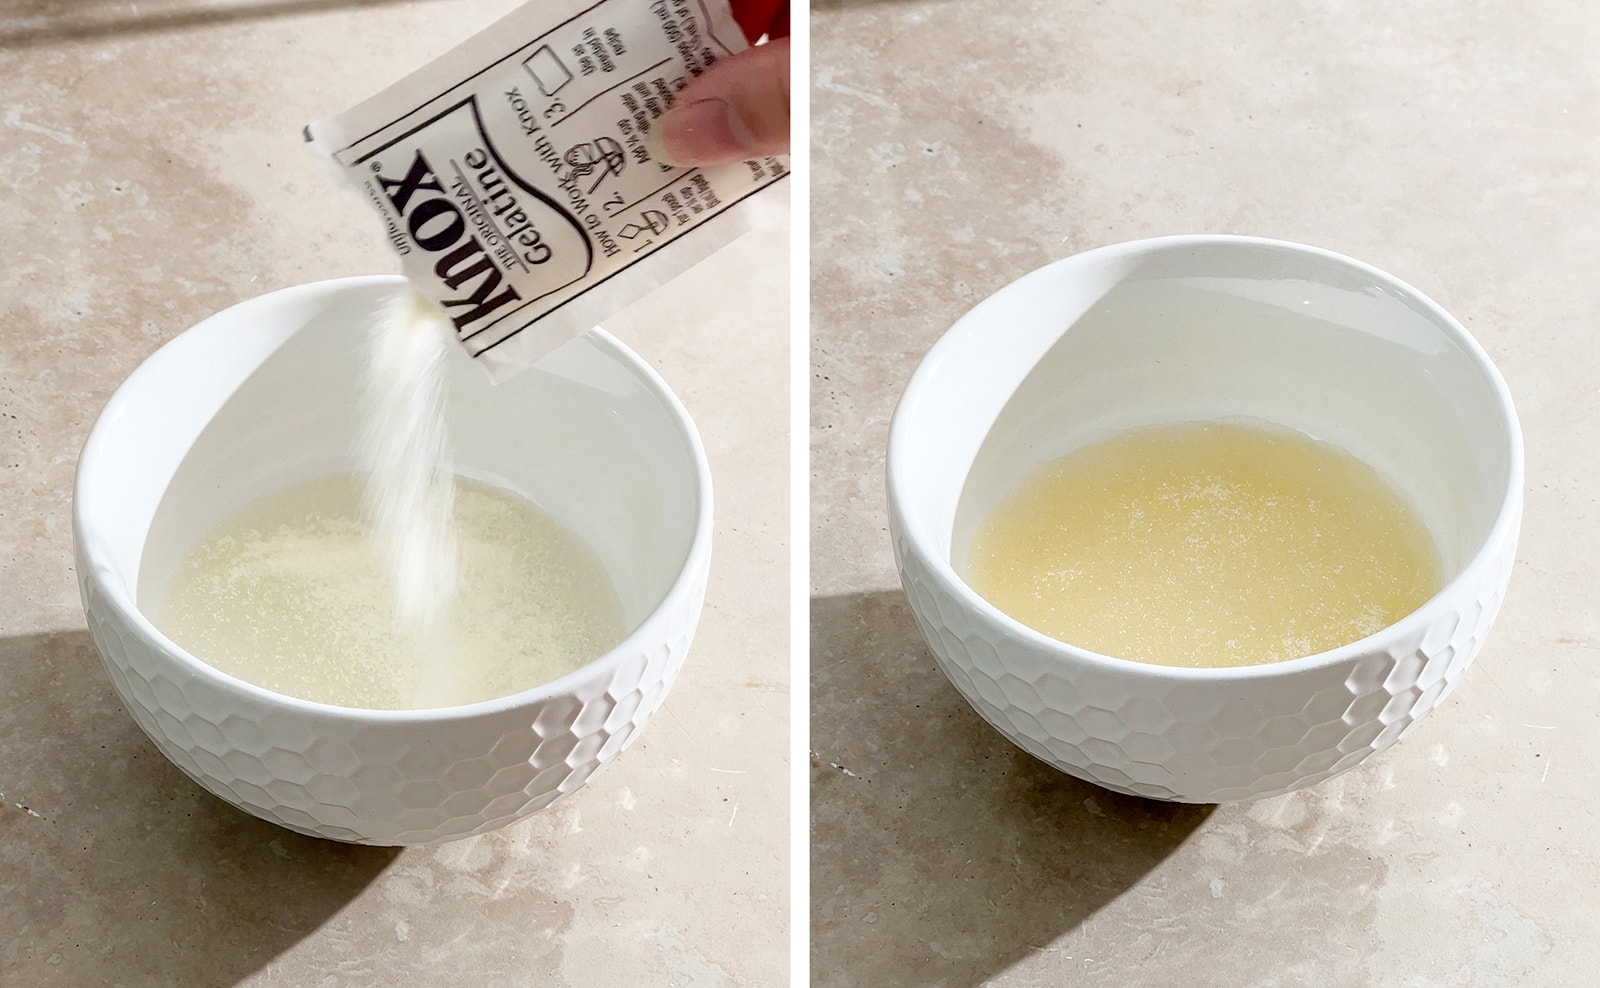 Left to right: sprinkling a packet of gelatin powder into bowl of water, bowl of bloomed gelatin.